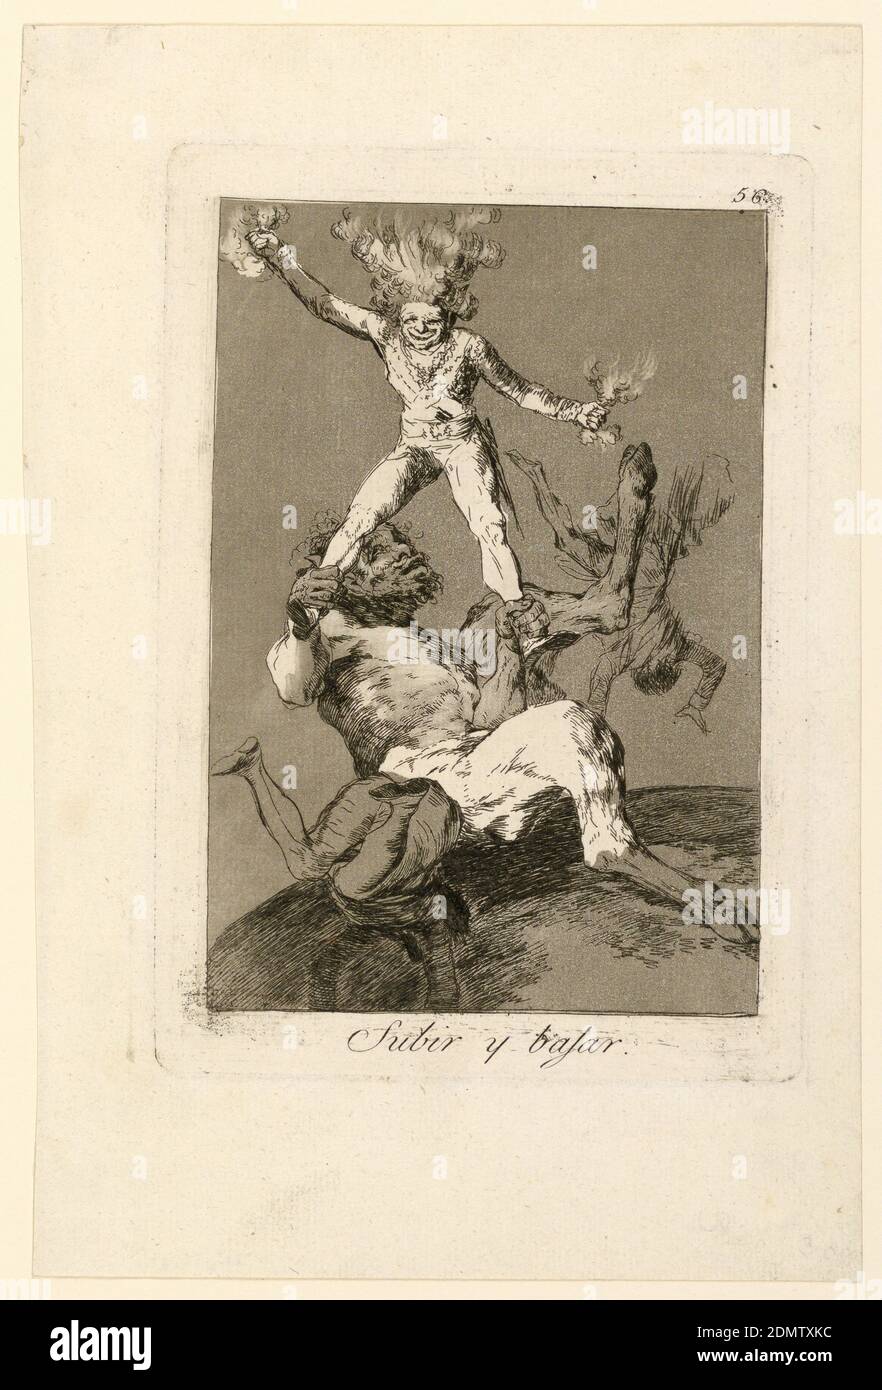 Subir y Bajar (Up and Down), Francisco de Goya y Lucientes, Spanish, 1746 - 1828, Etching and aquatint on paper, 1803, figures, Print Stock Photo